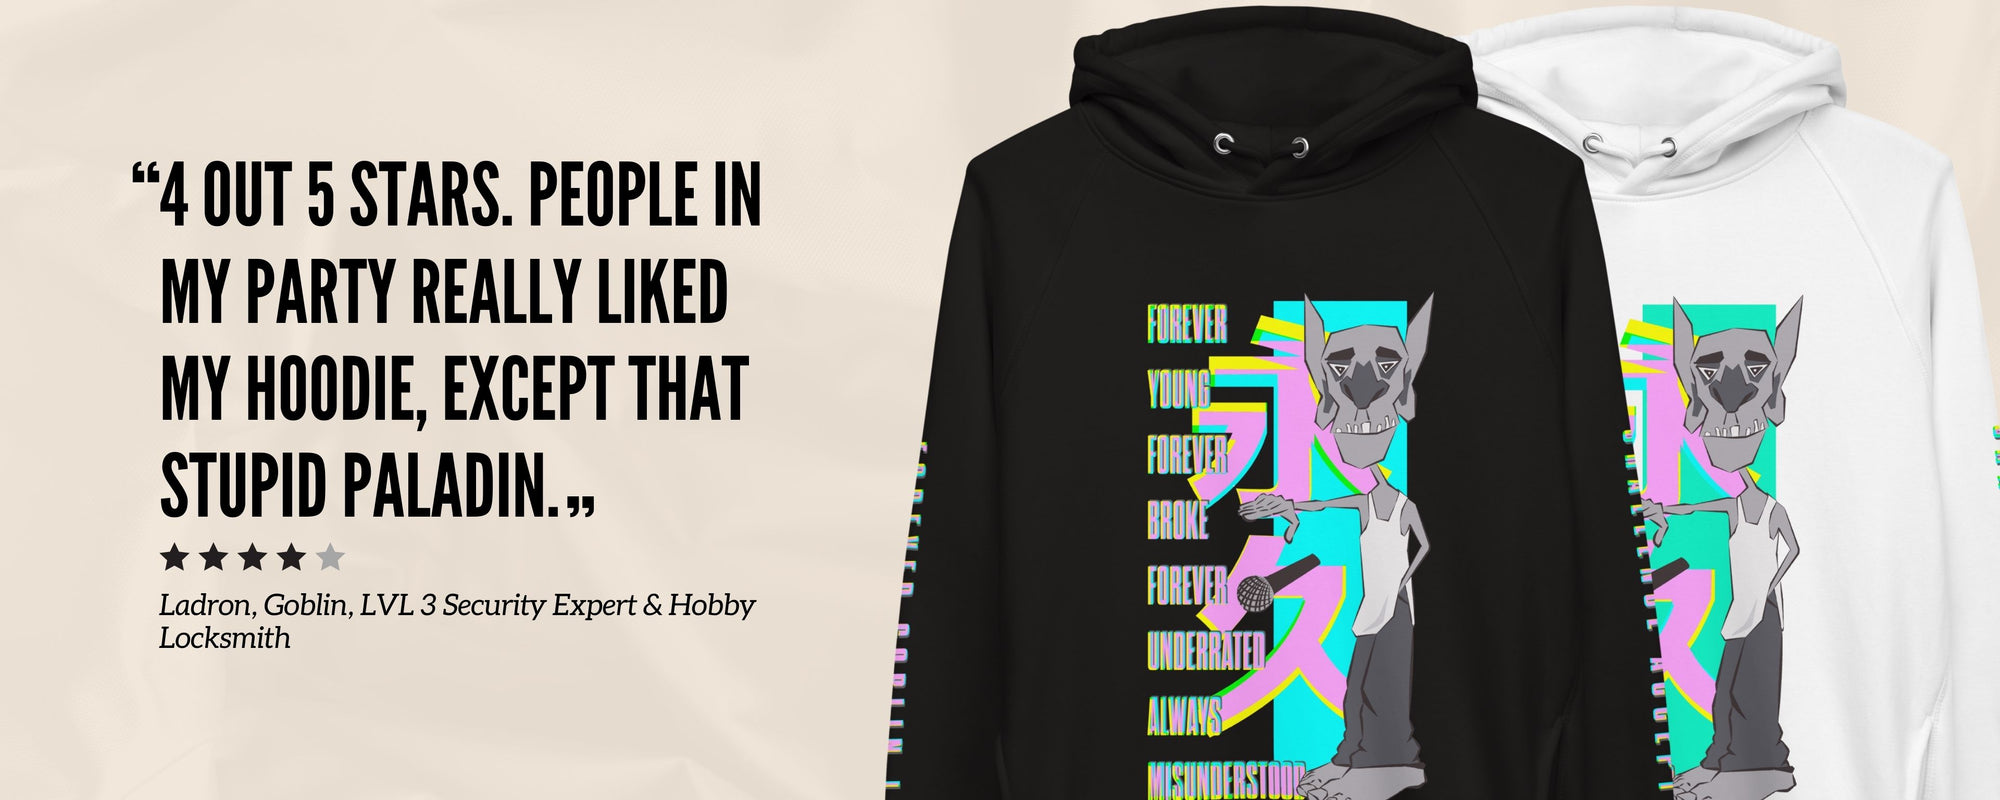 "4 out 5 Stars. people in my party really liked my hoodie, except that stupid paladin." - Ladron, Goblin, LVL 3 Security Expert & Hobby Locksmith